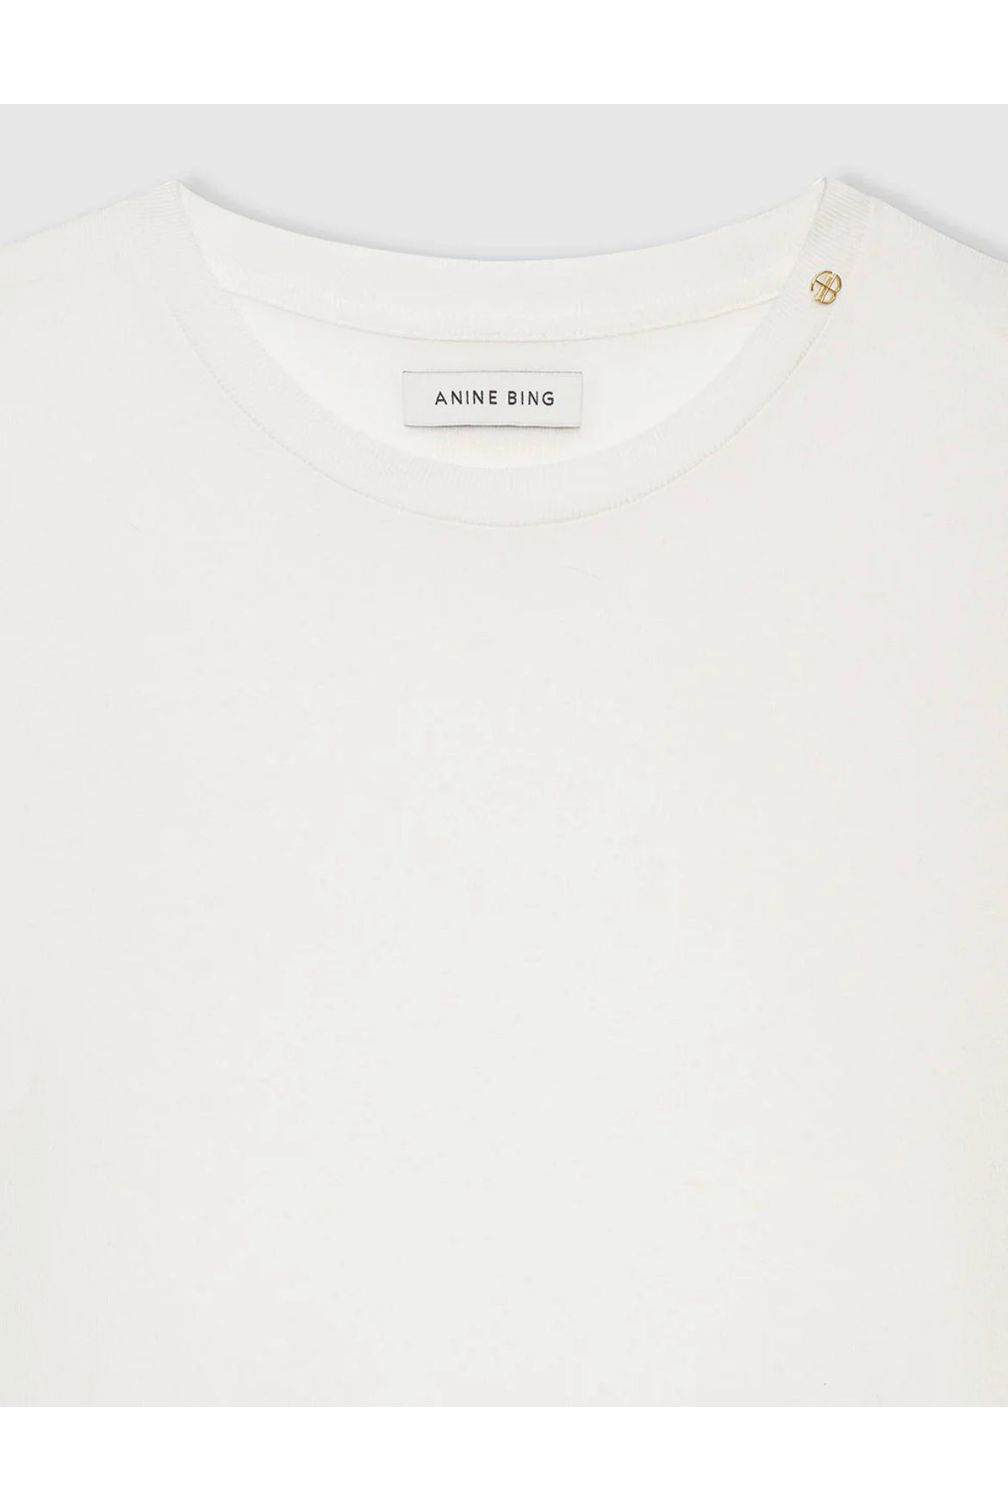 Amani Tee in Off White Cashmere Blend by Anine Bing